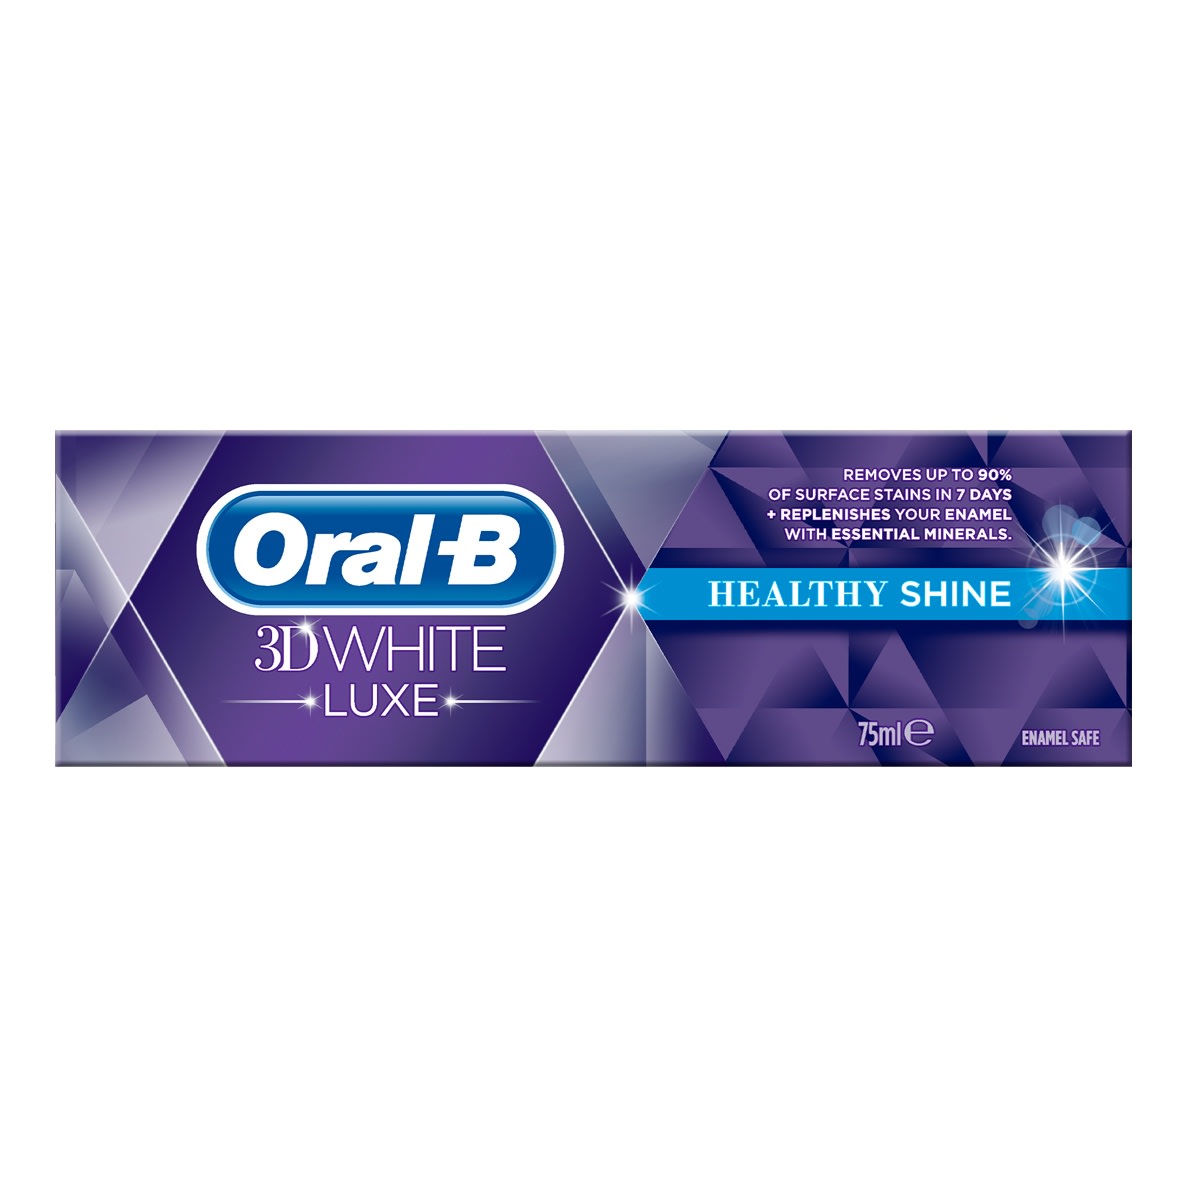 Oral-B 3D White Luxe Healthy Shine tandpasta undefined